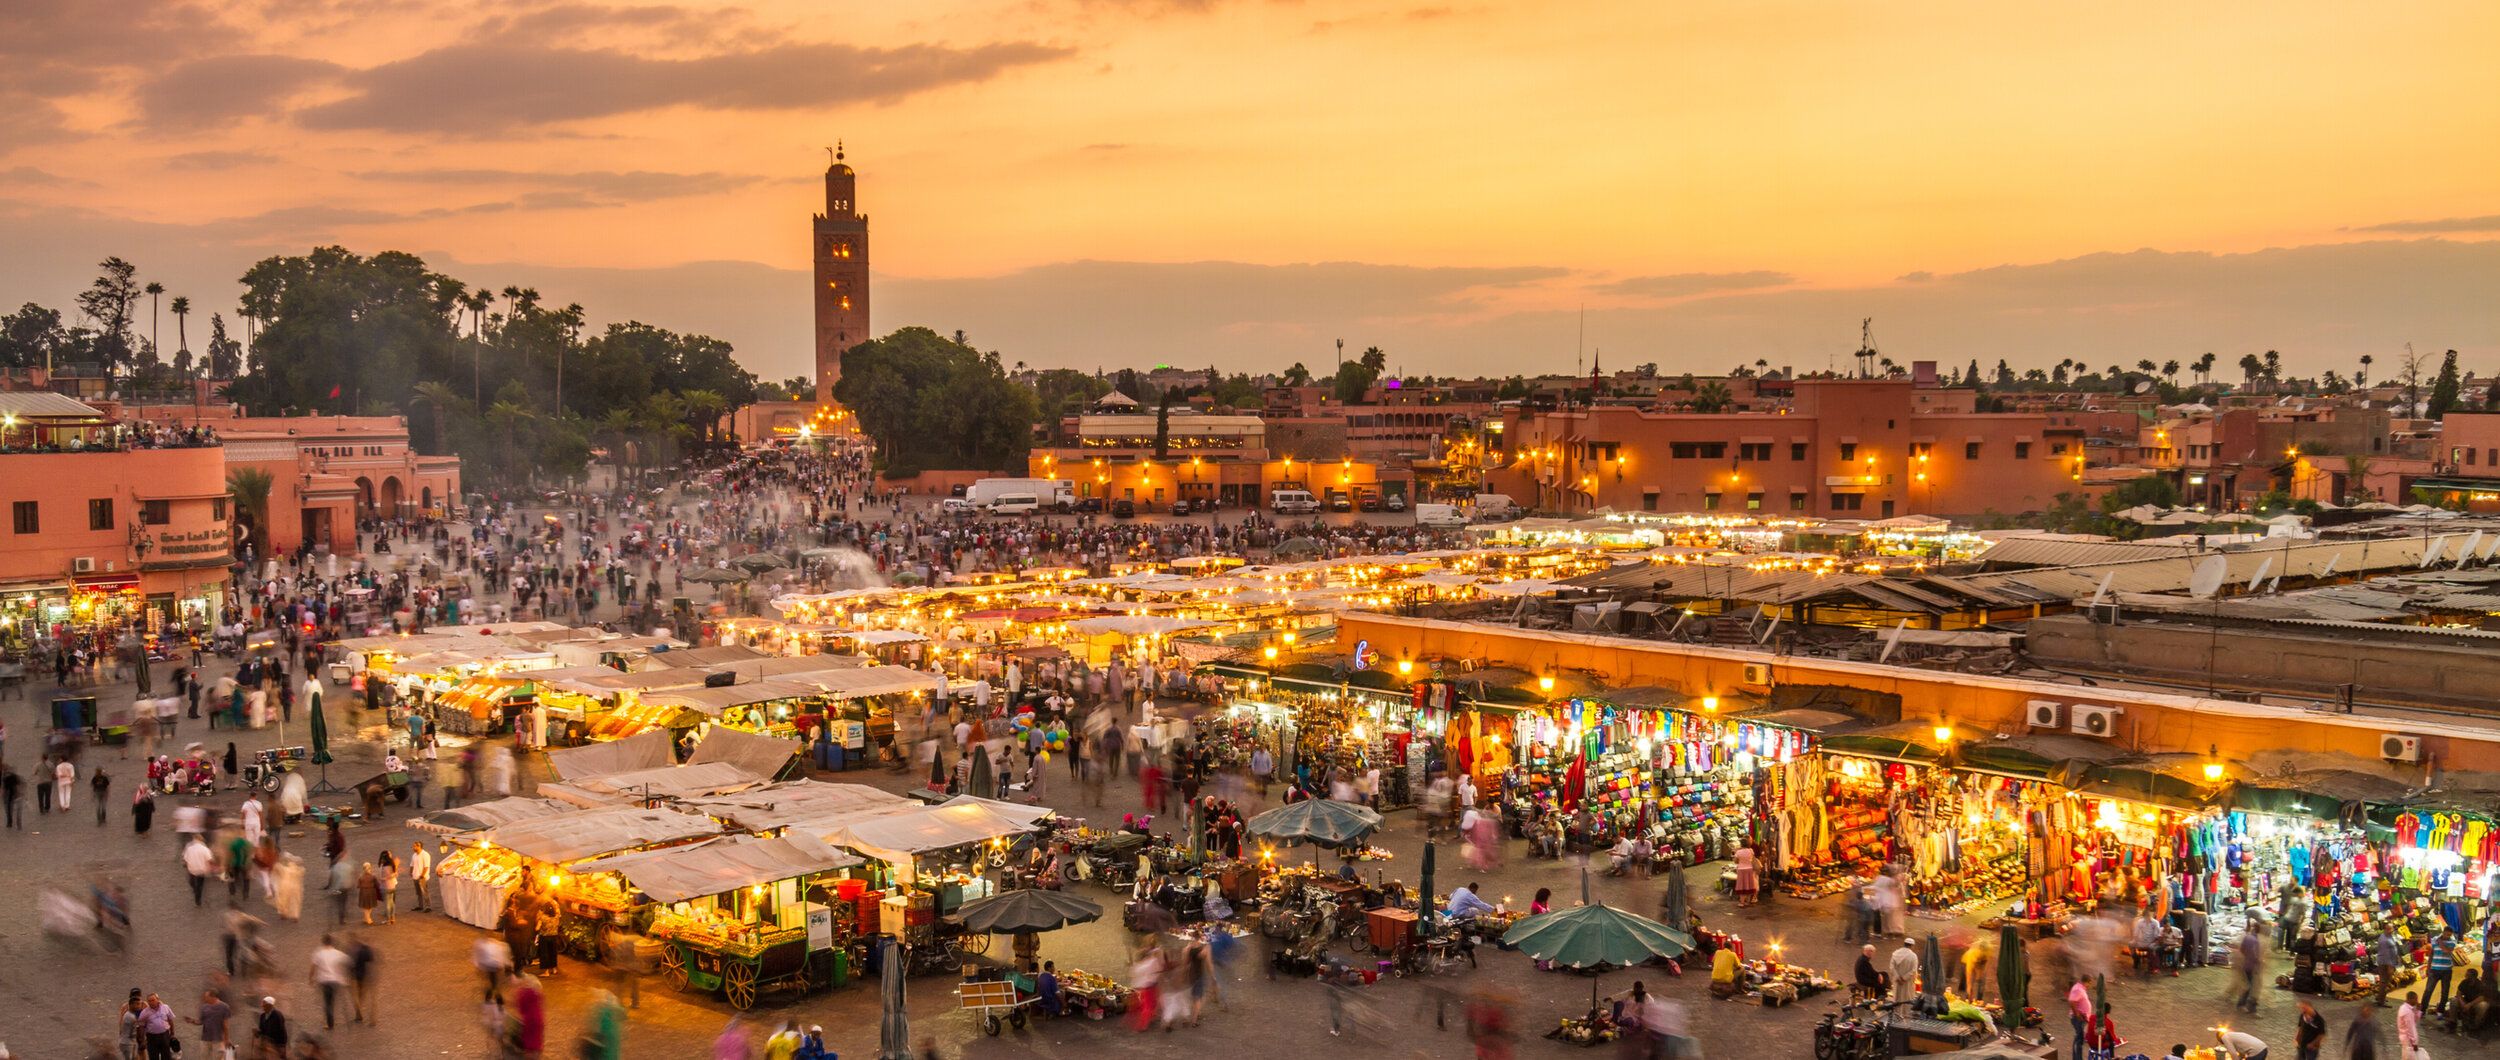 Marrakesh's square and market Jamaa El Fna at sunset (photo courtesy Getty Images).